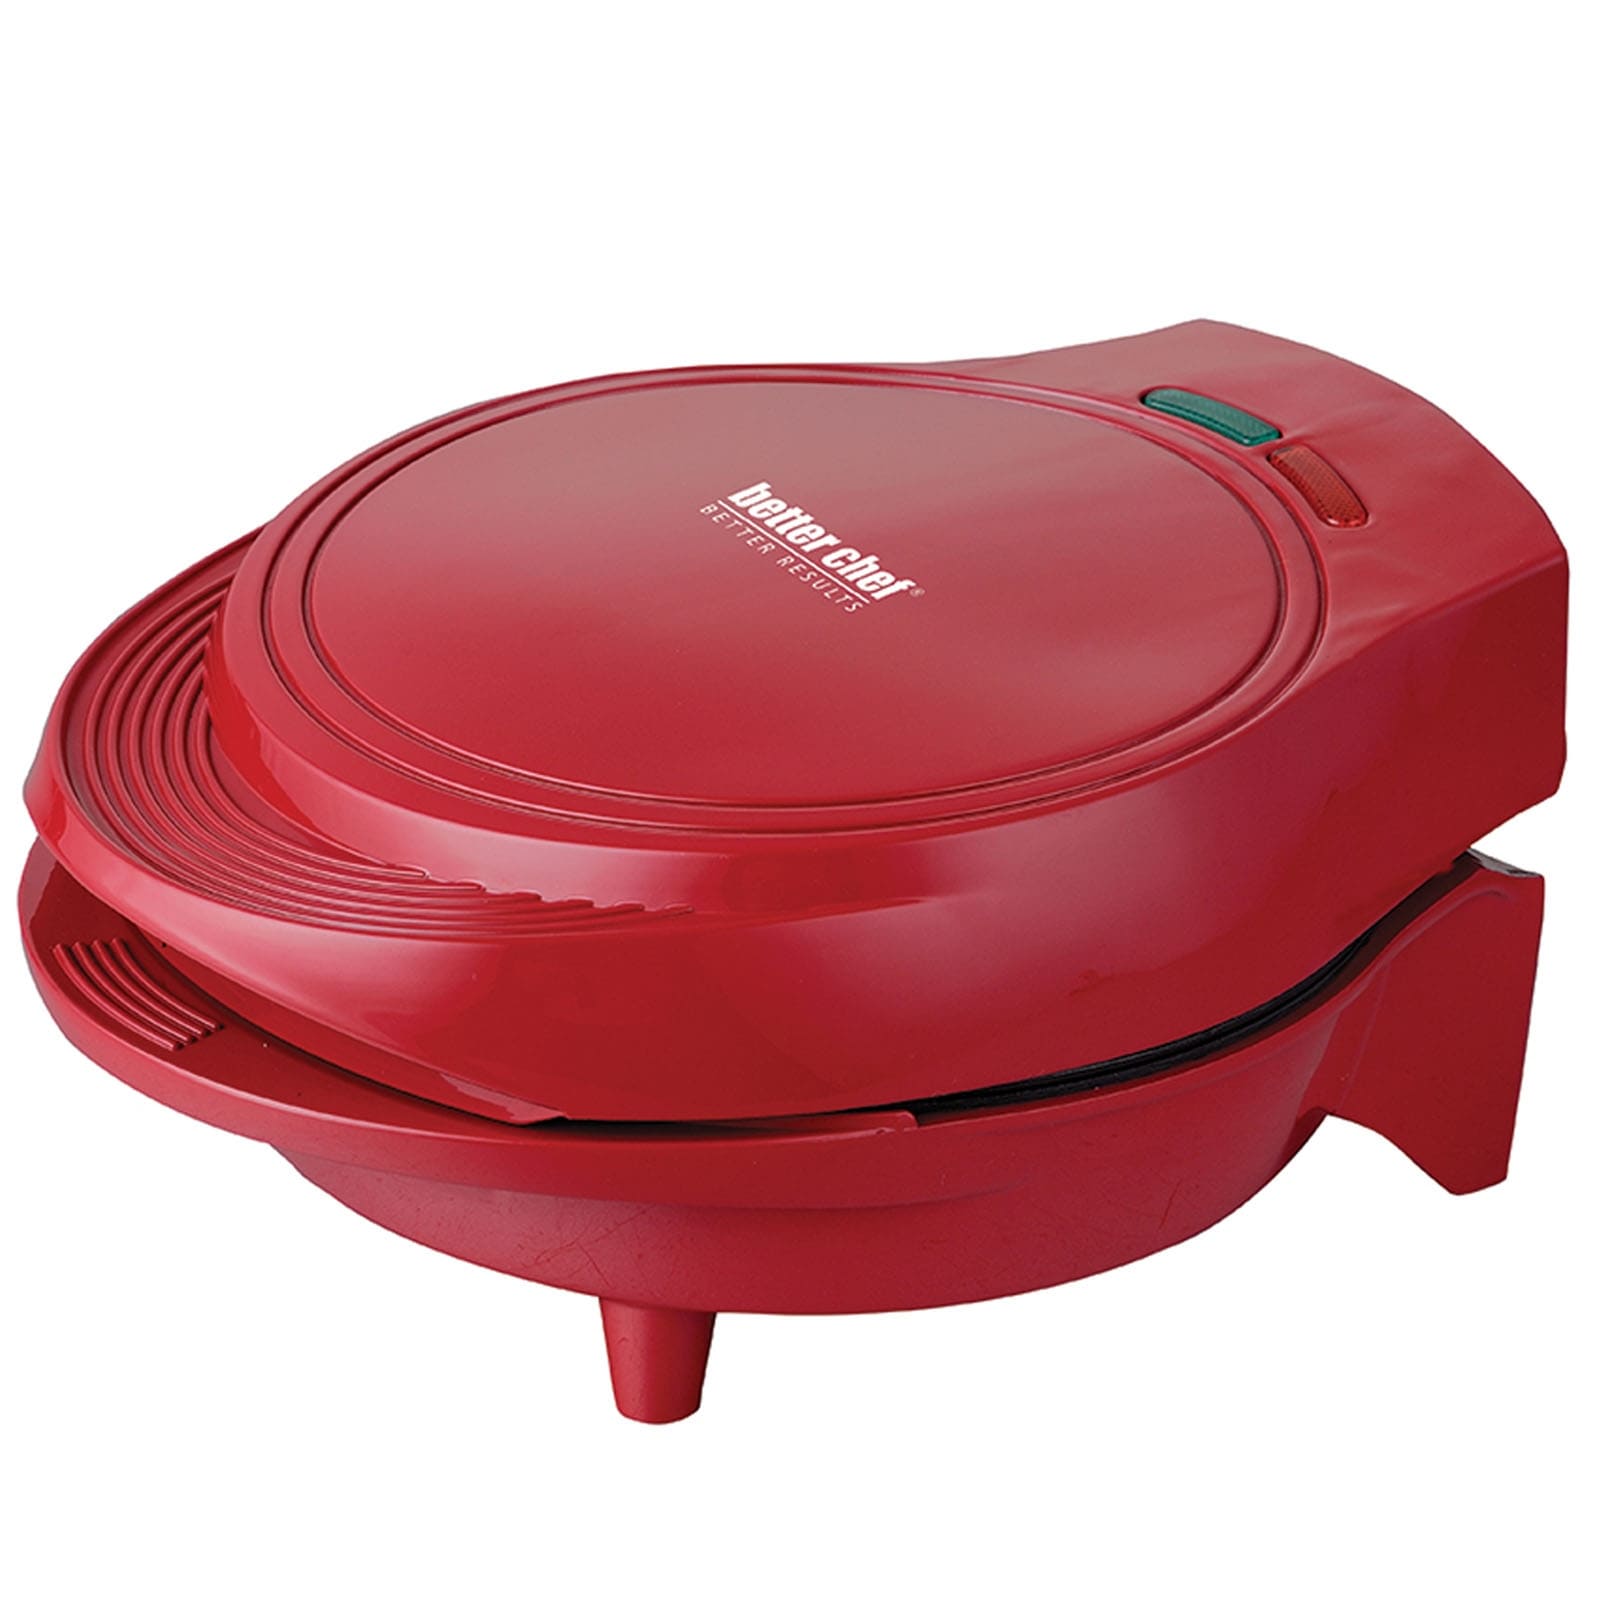 https://ak1.ostkcdn.com/images/products/is/images/direct/487078ac8c310c7b583578236fc01c26fdde043d/Better-Chef-Electric-Double-Omelet-Maker---Red.jpg